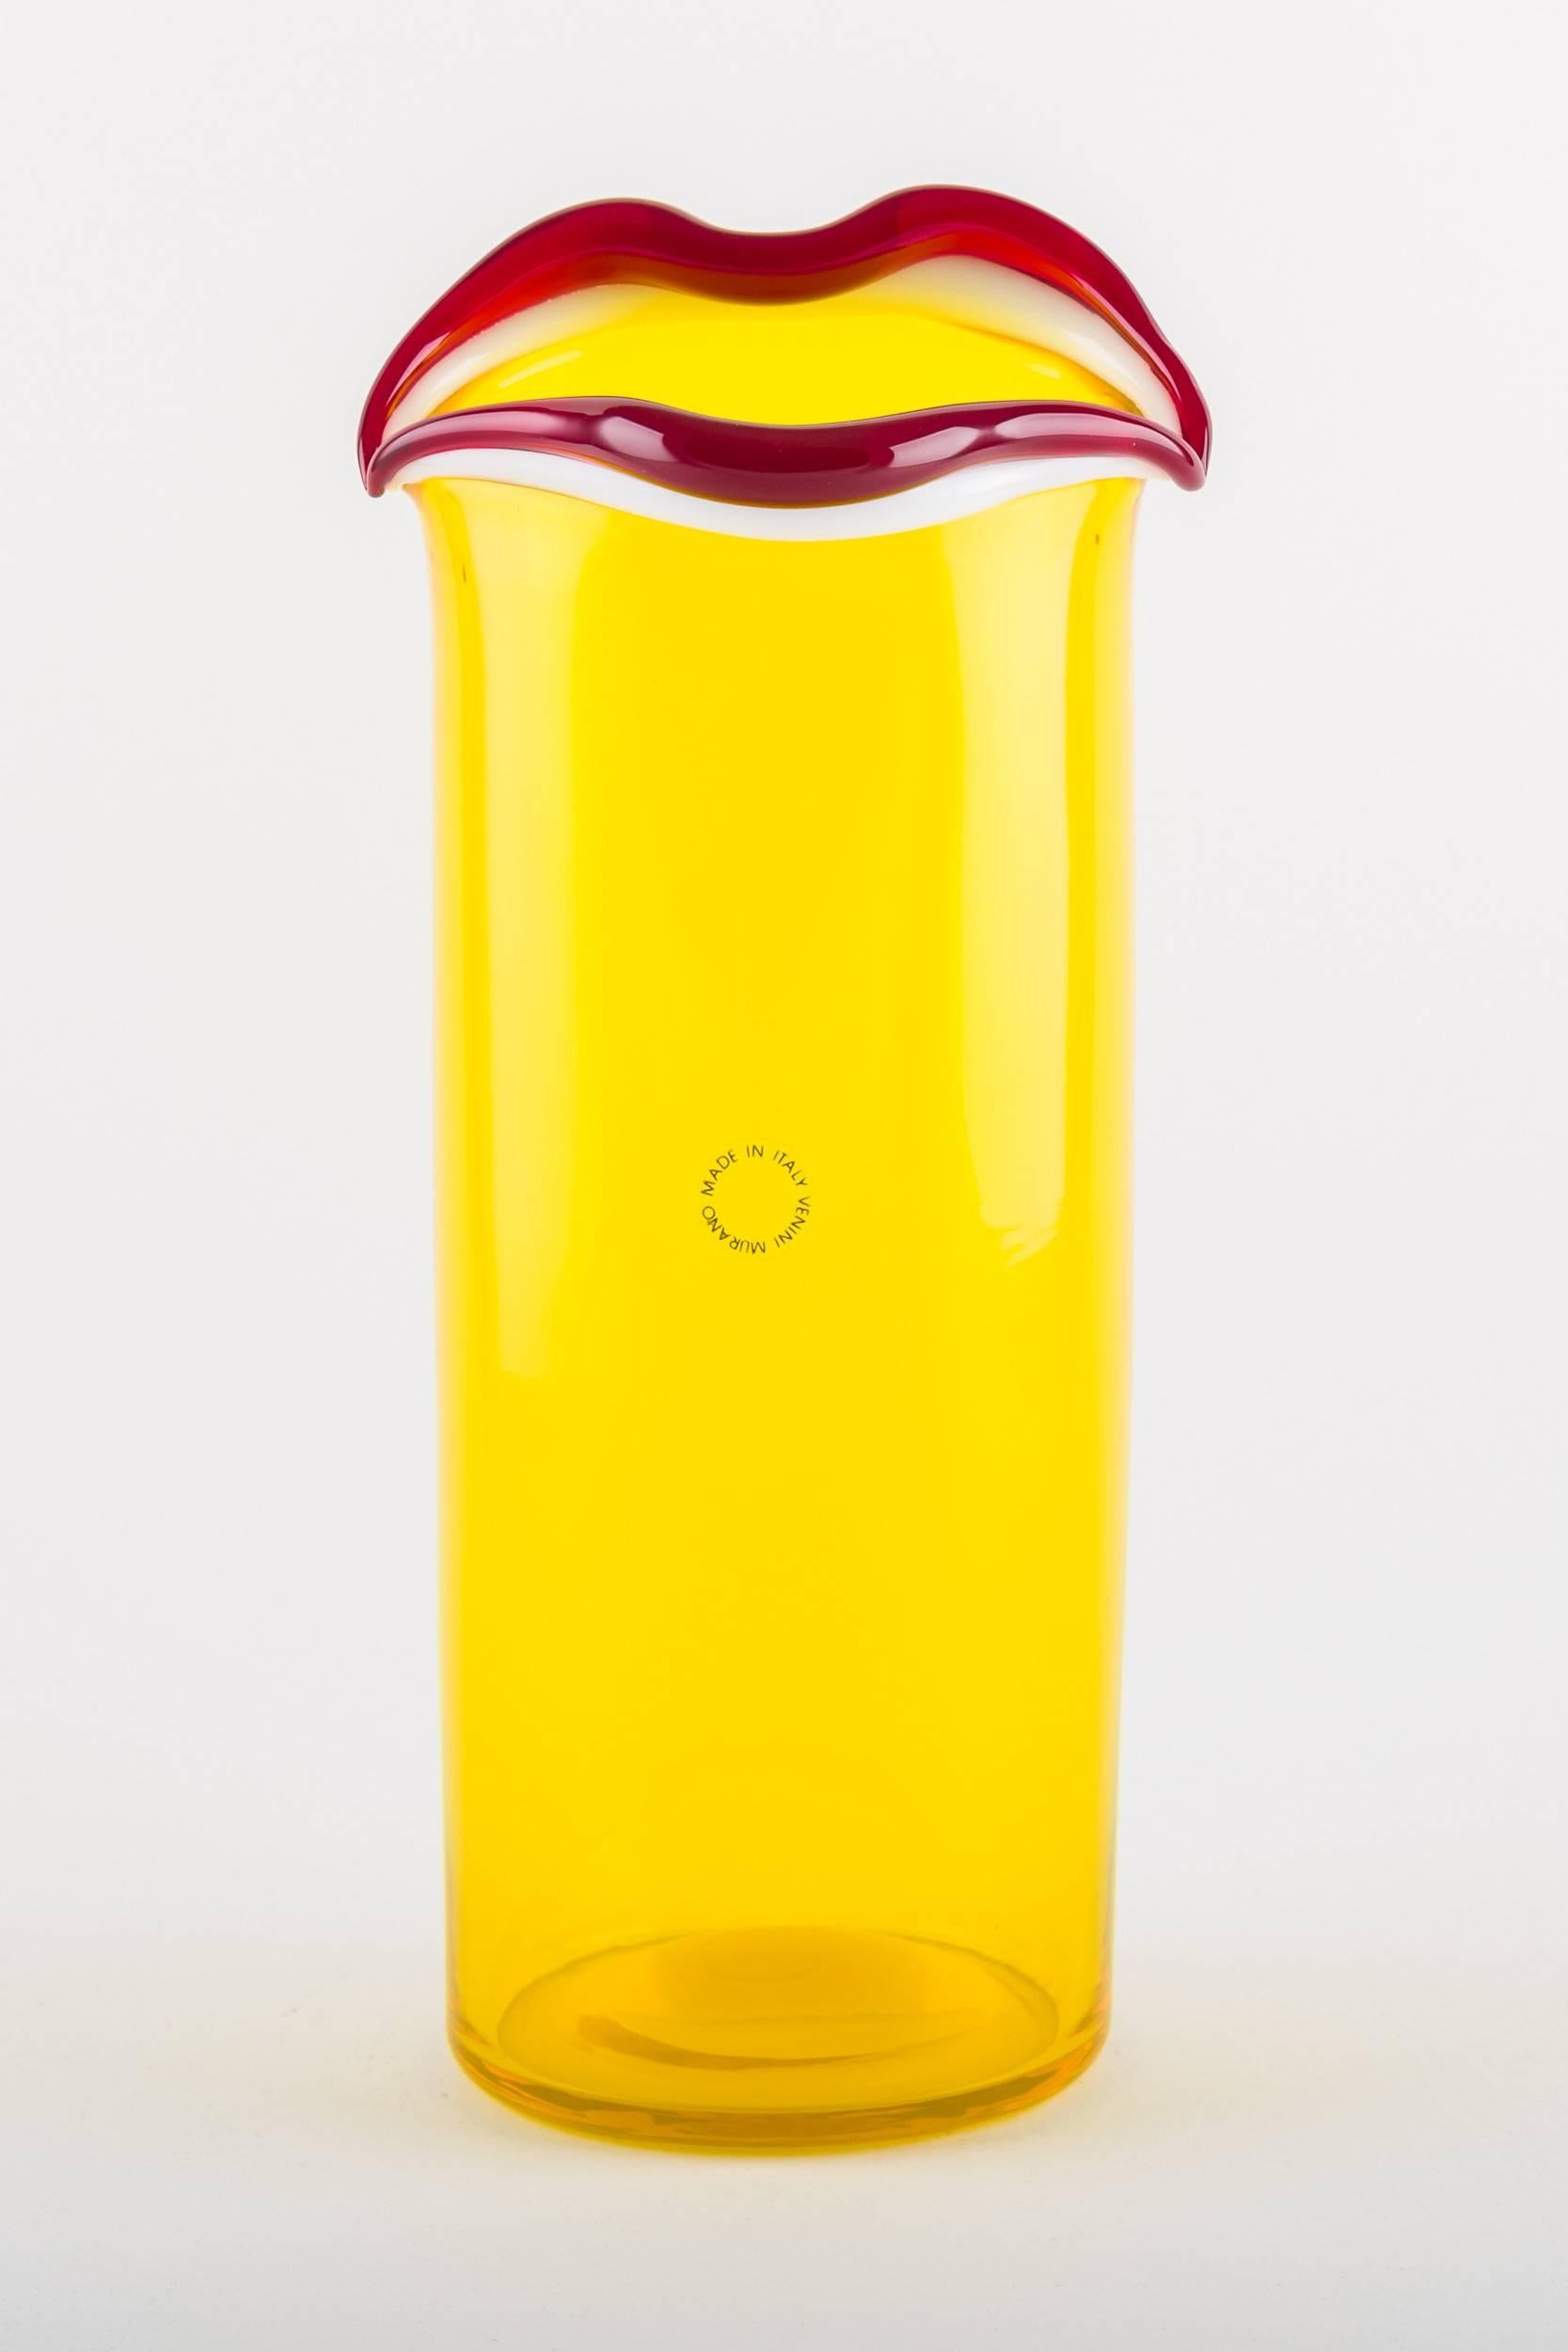 Sorriso is the result of the last series of vases designed by Fulvio Bianconi for Venini at the end of the 80s.
It is a mouth-blown glass vase, on which is applied a milk-white smile with red lips.
The body of the vase is itself made of yellow